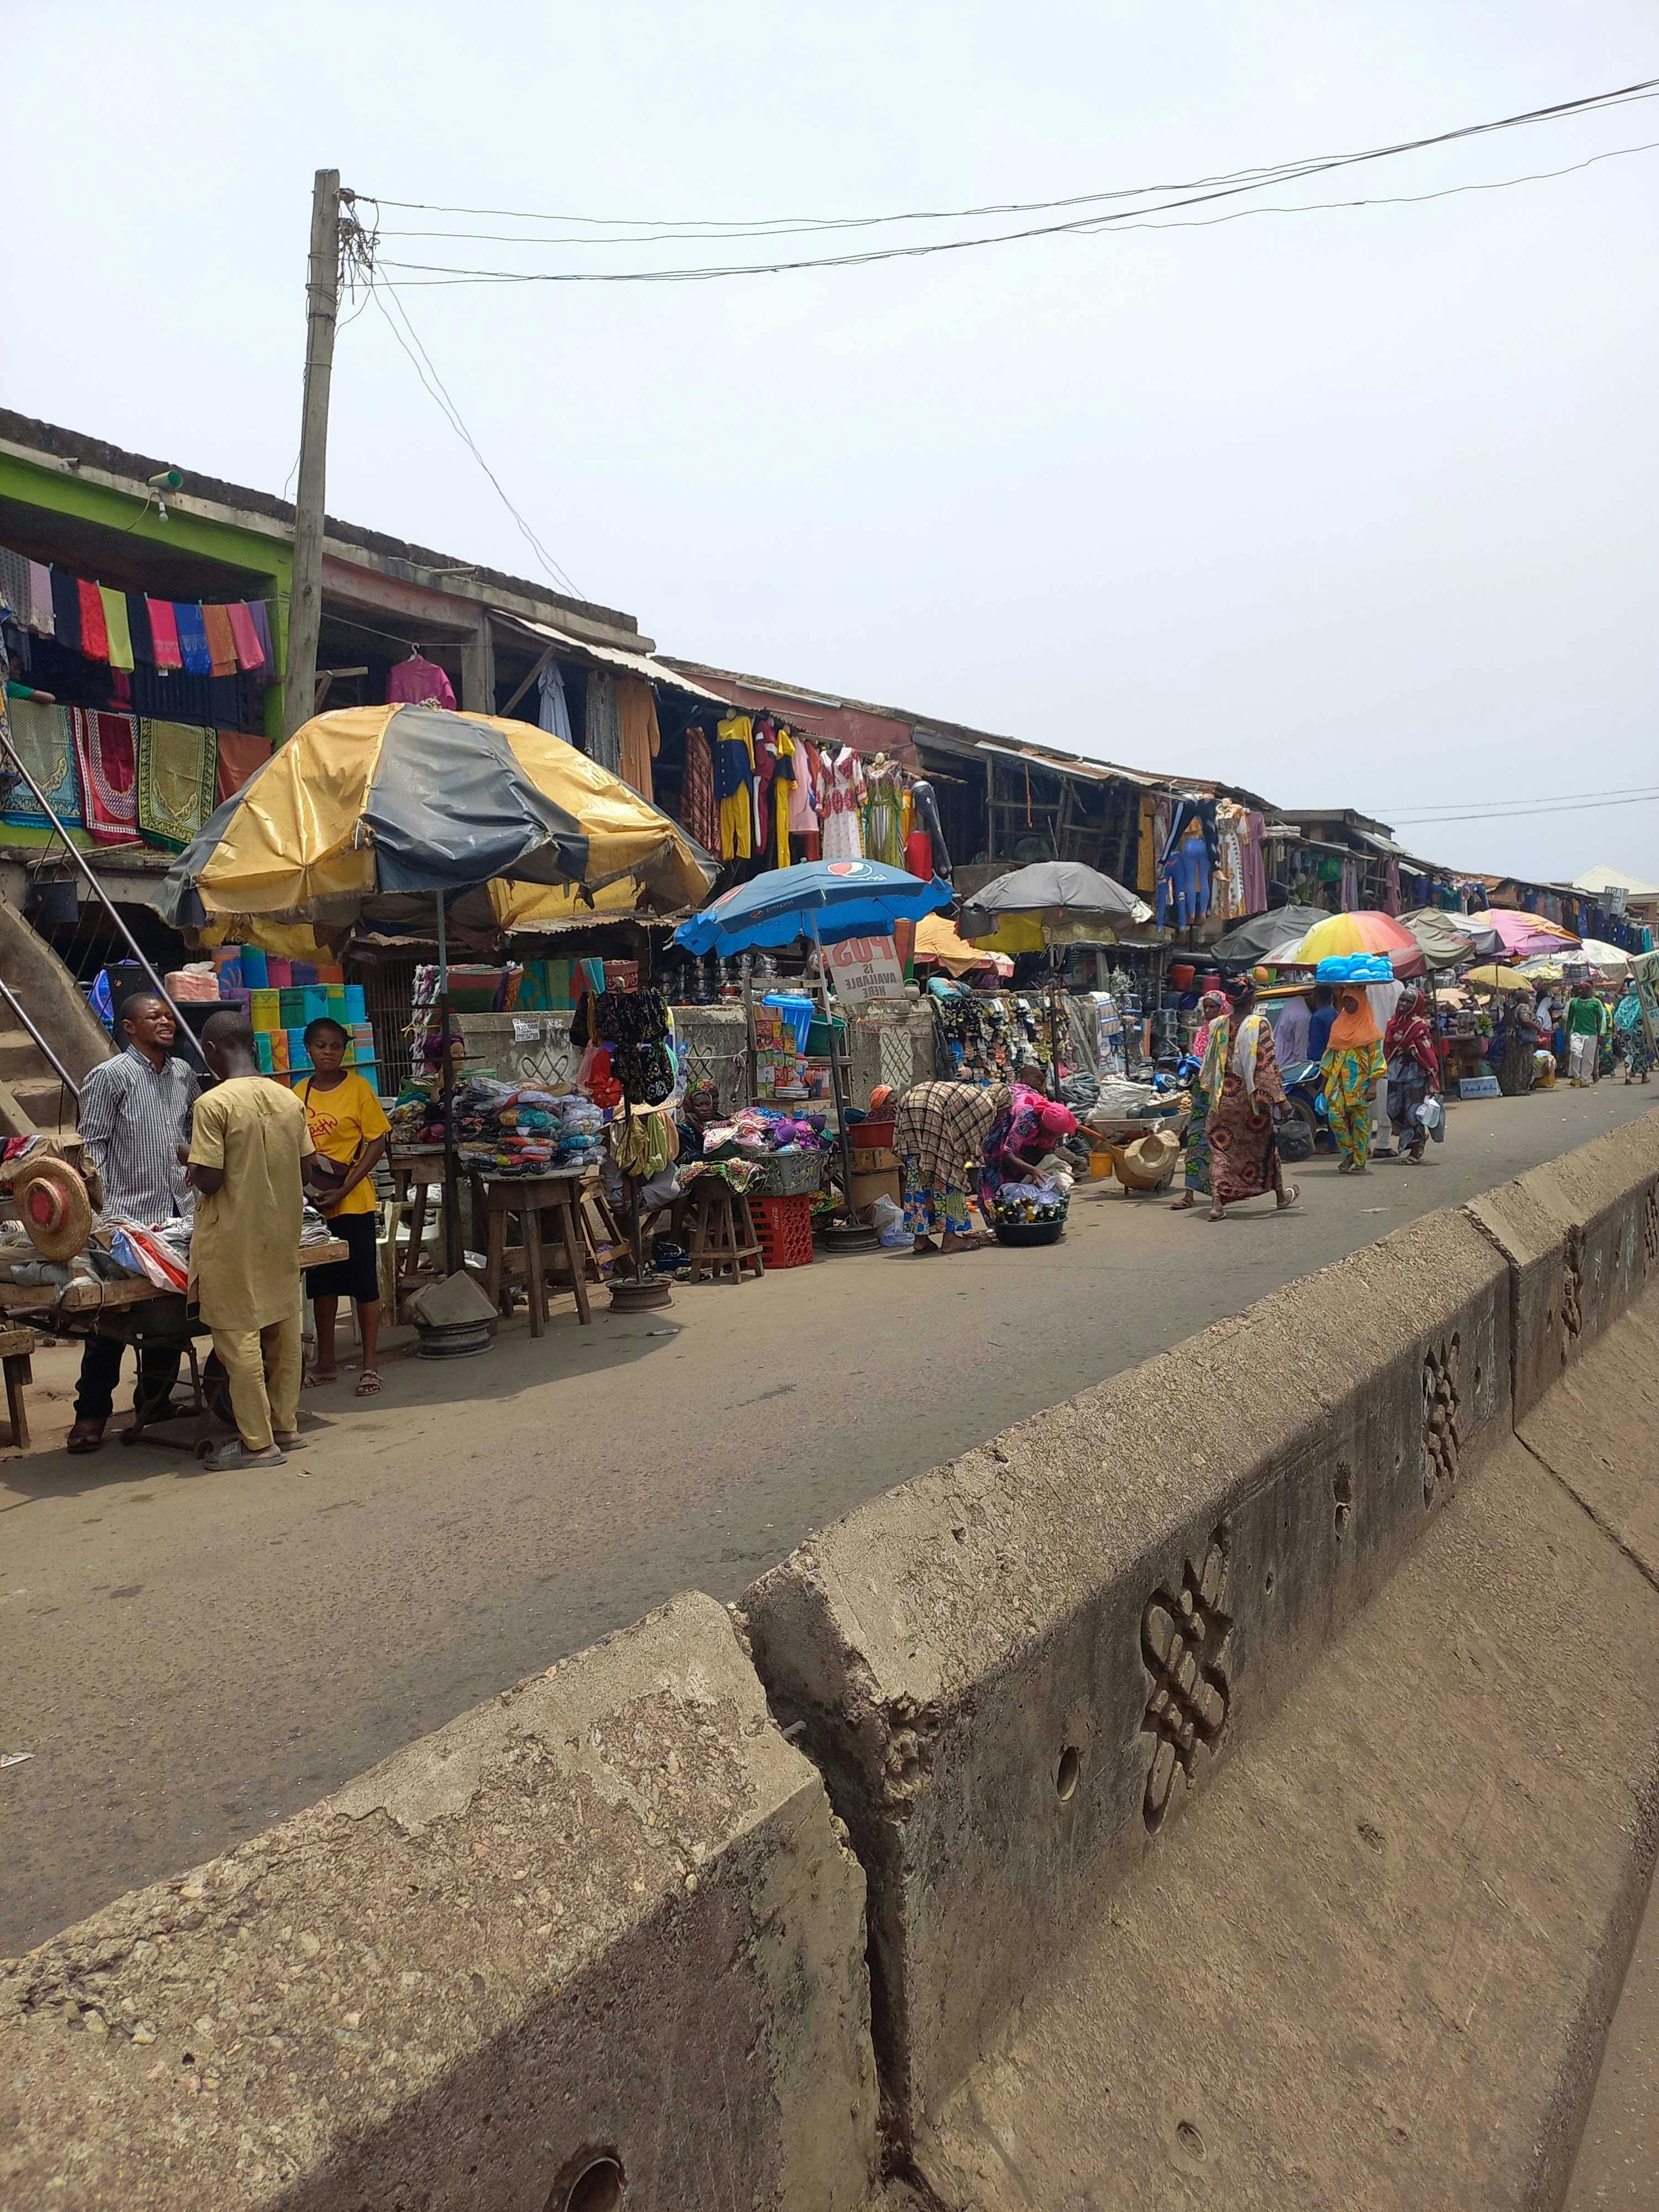 A large roadside market where goods are being sold in Nigeria.